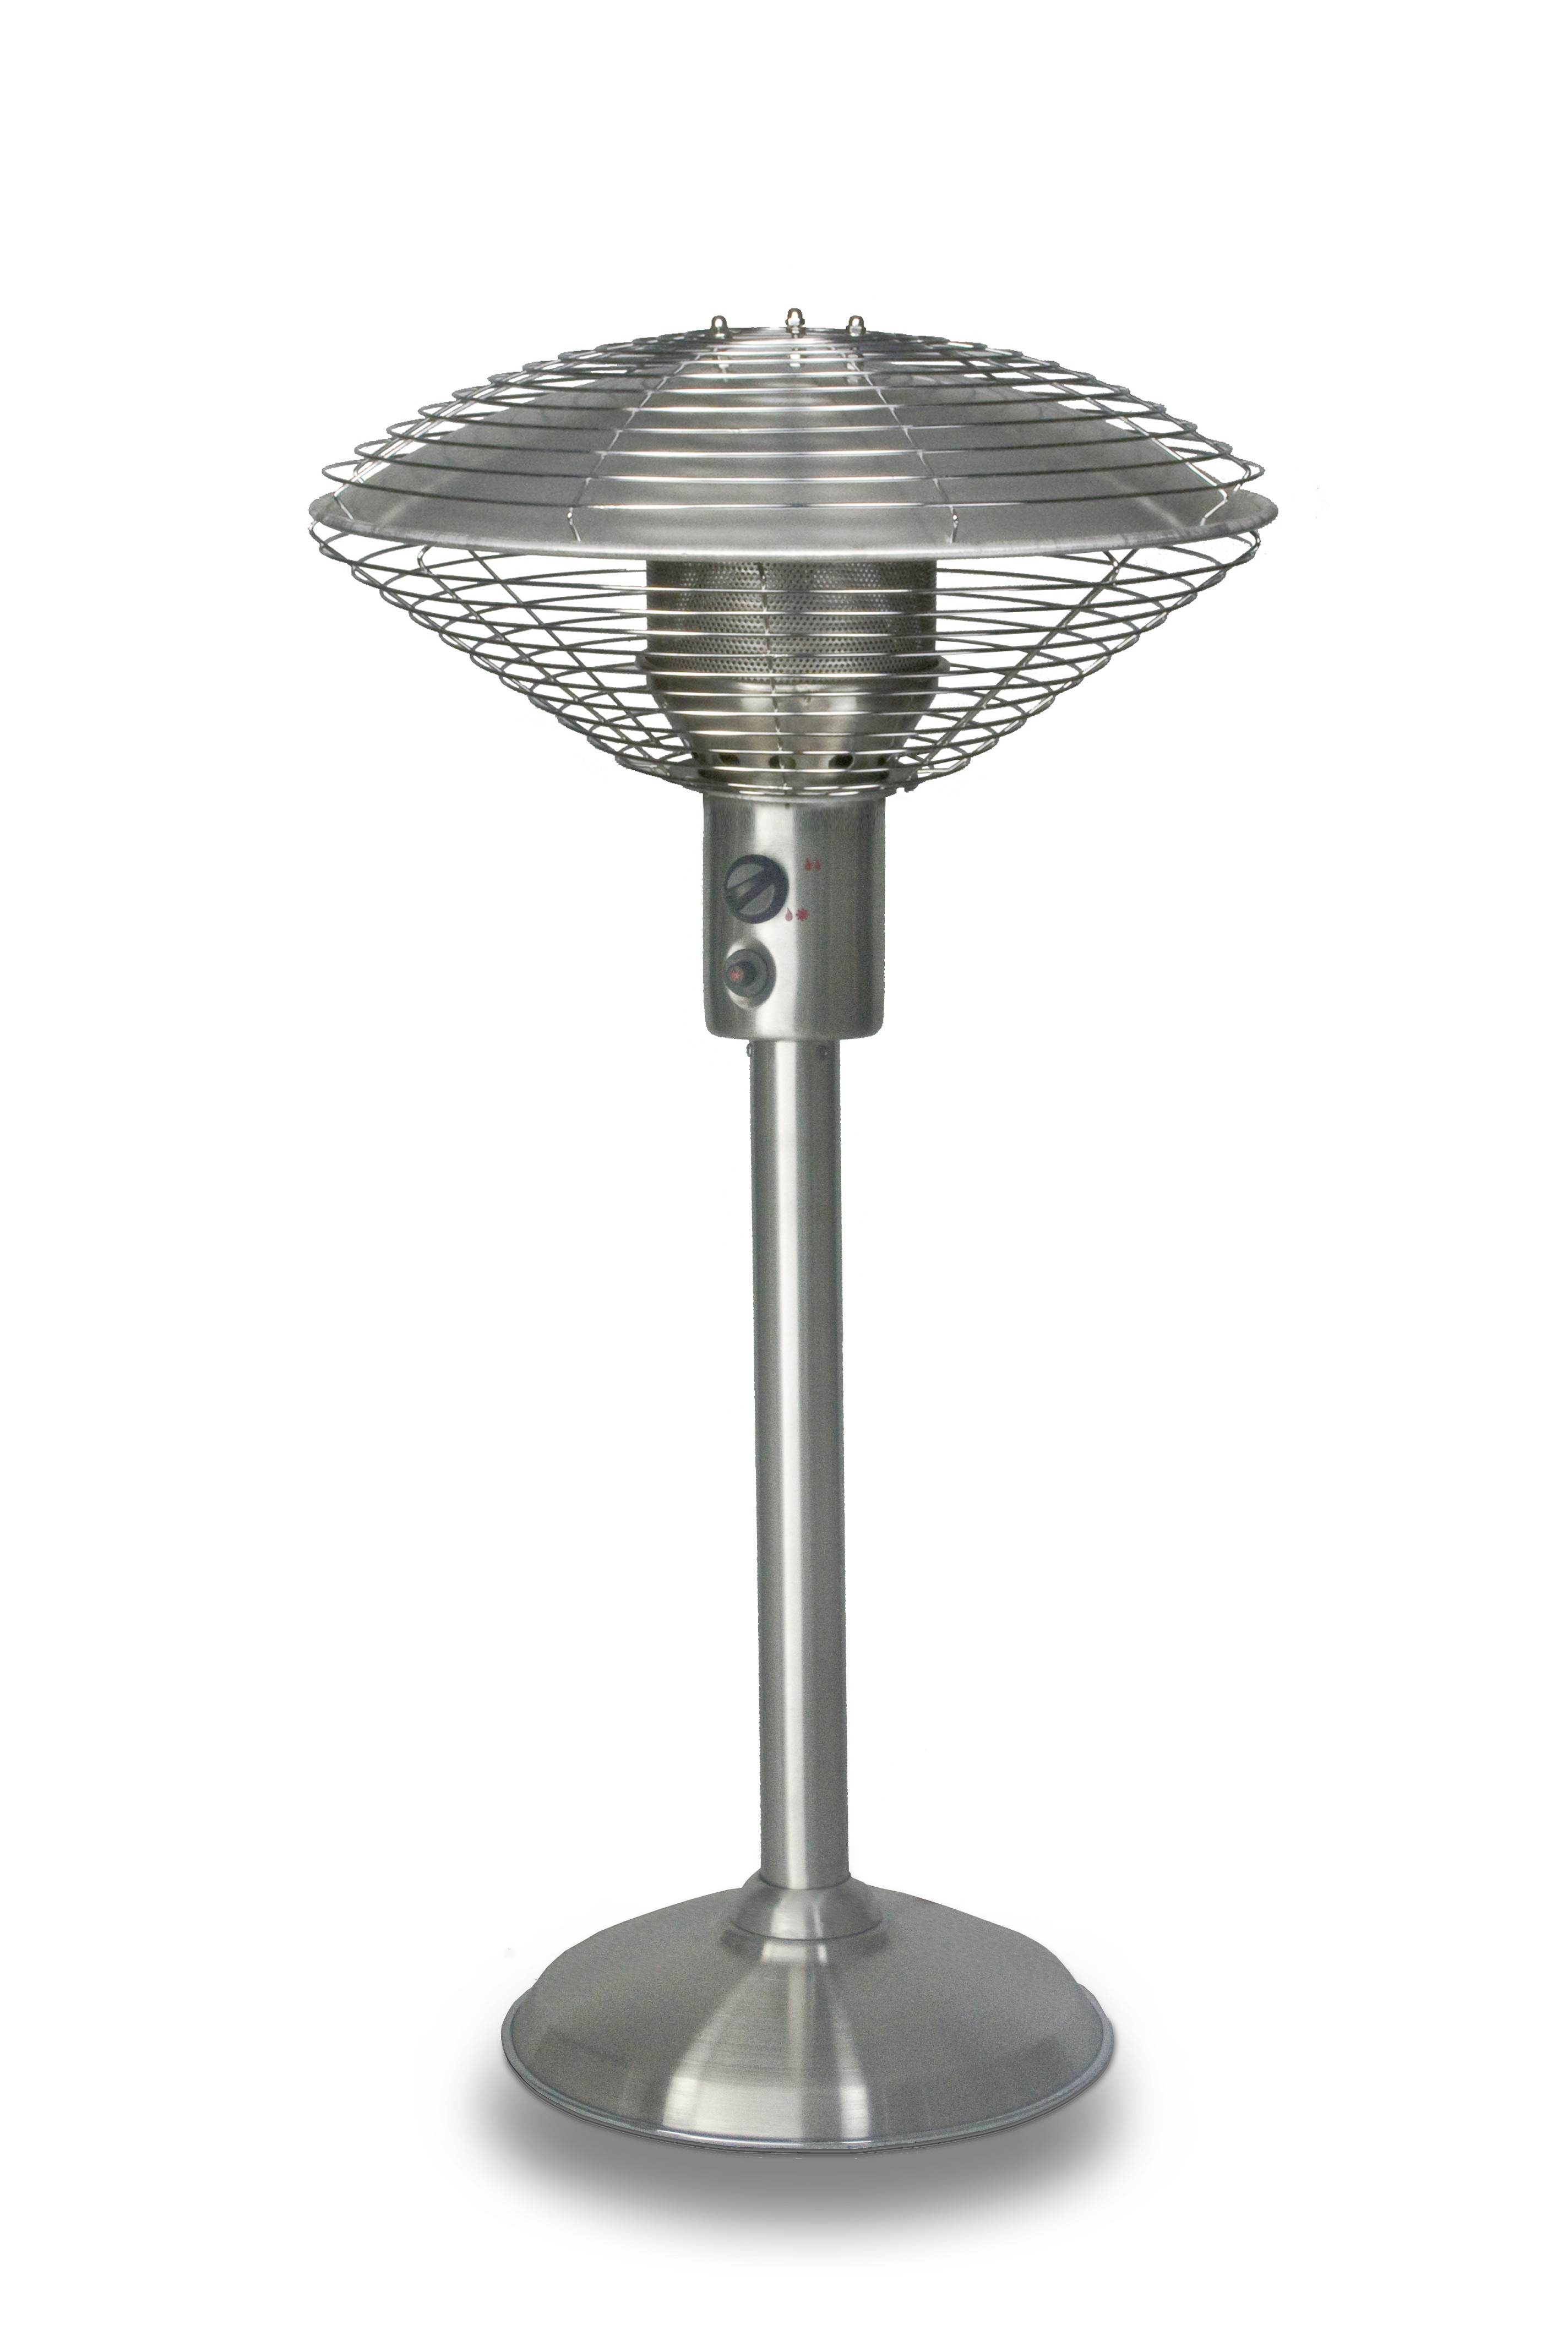 Sahara 45kw Table Top Patio Heater intended for proportions 2848 X 4272